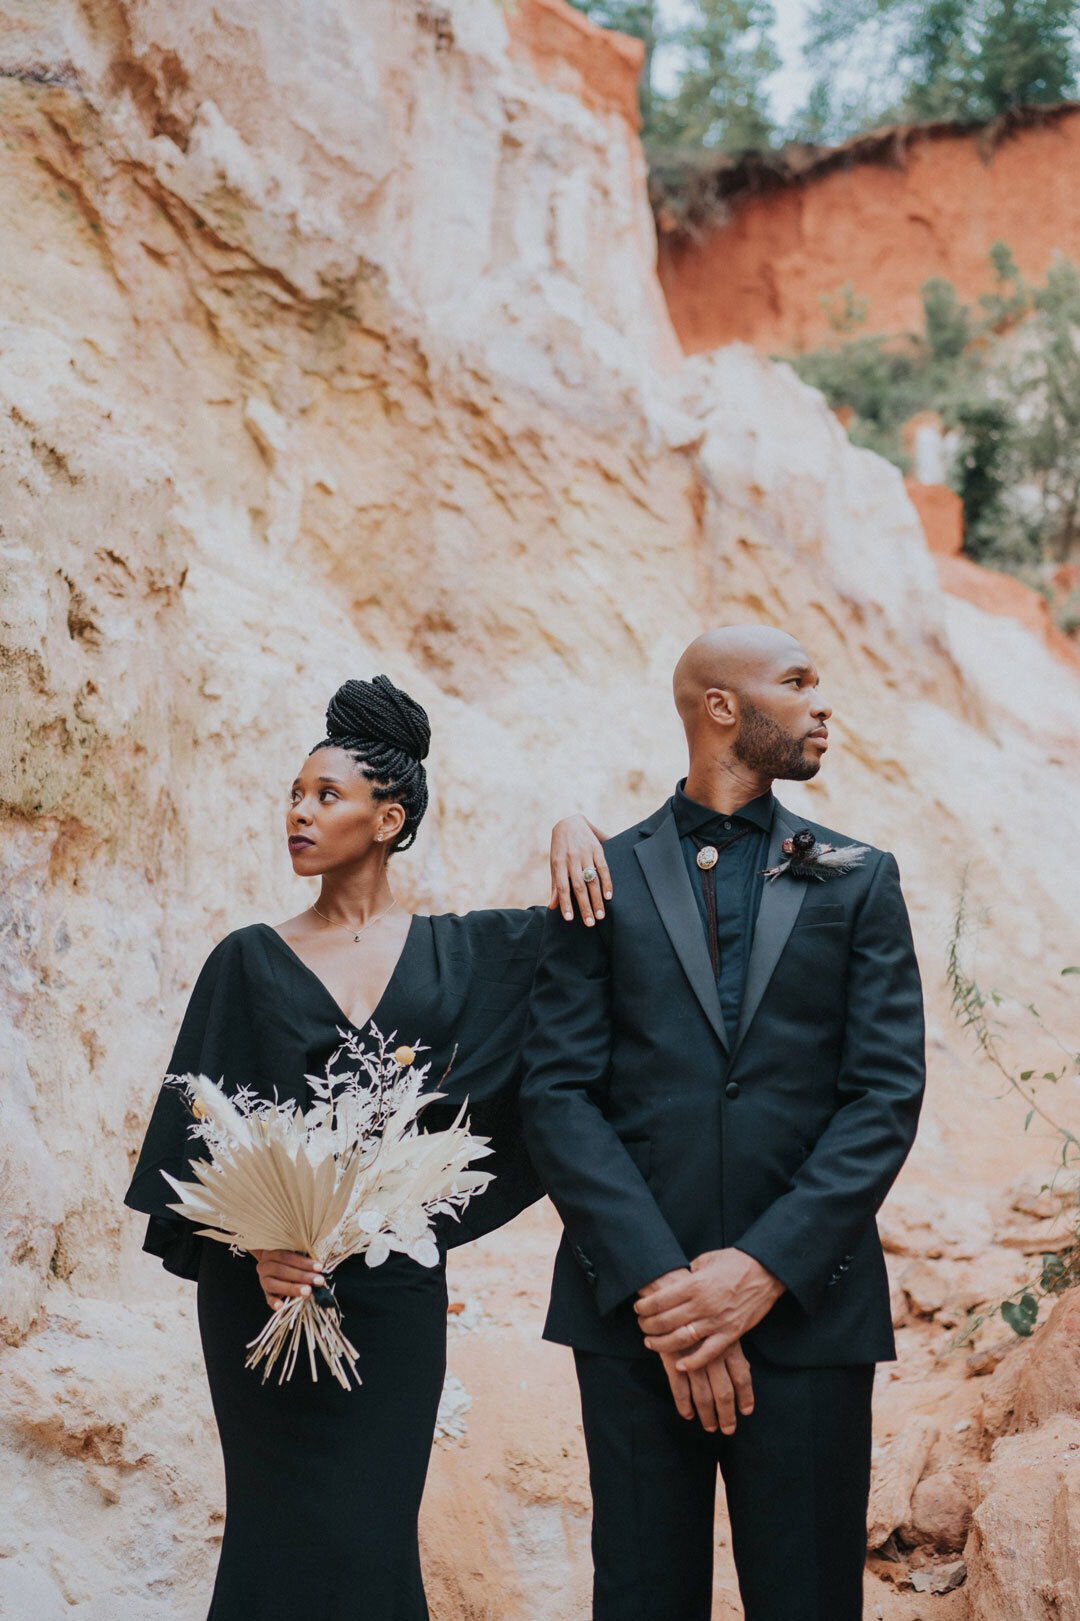 Black couple wearing black outfits standing in the desert